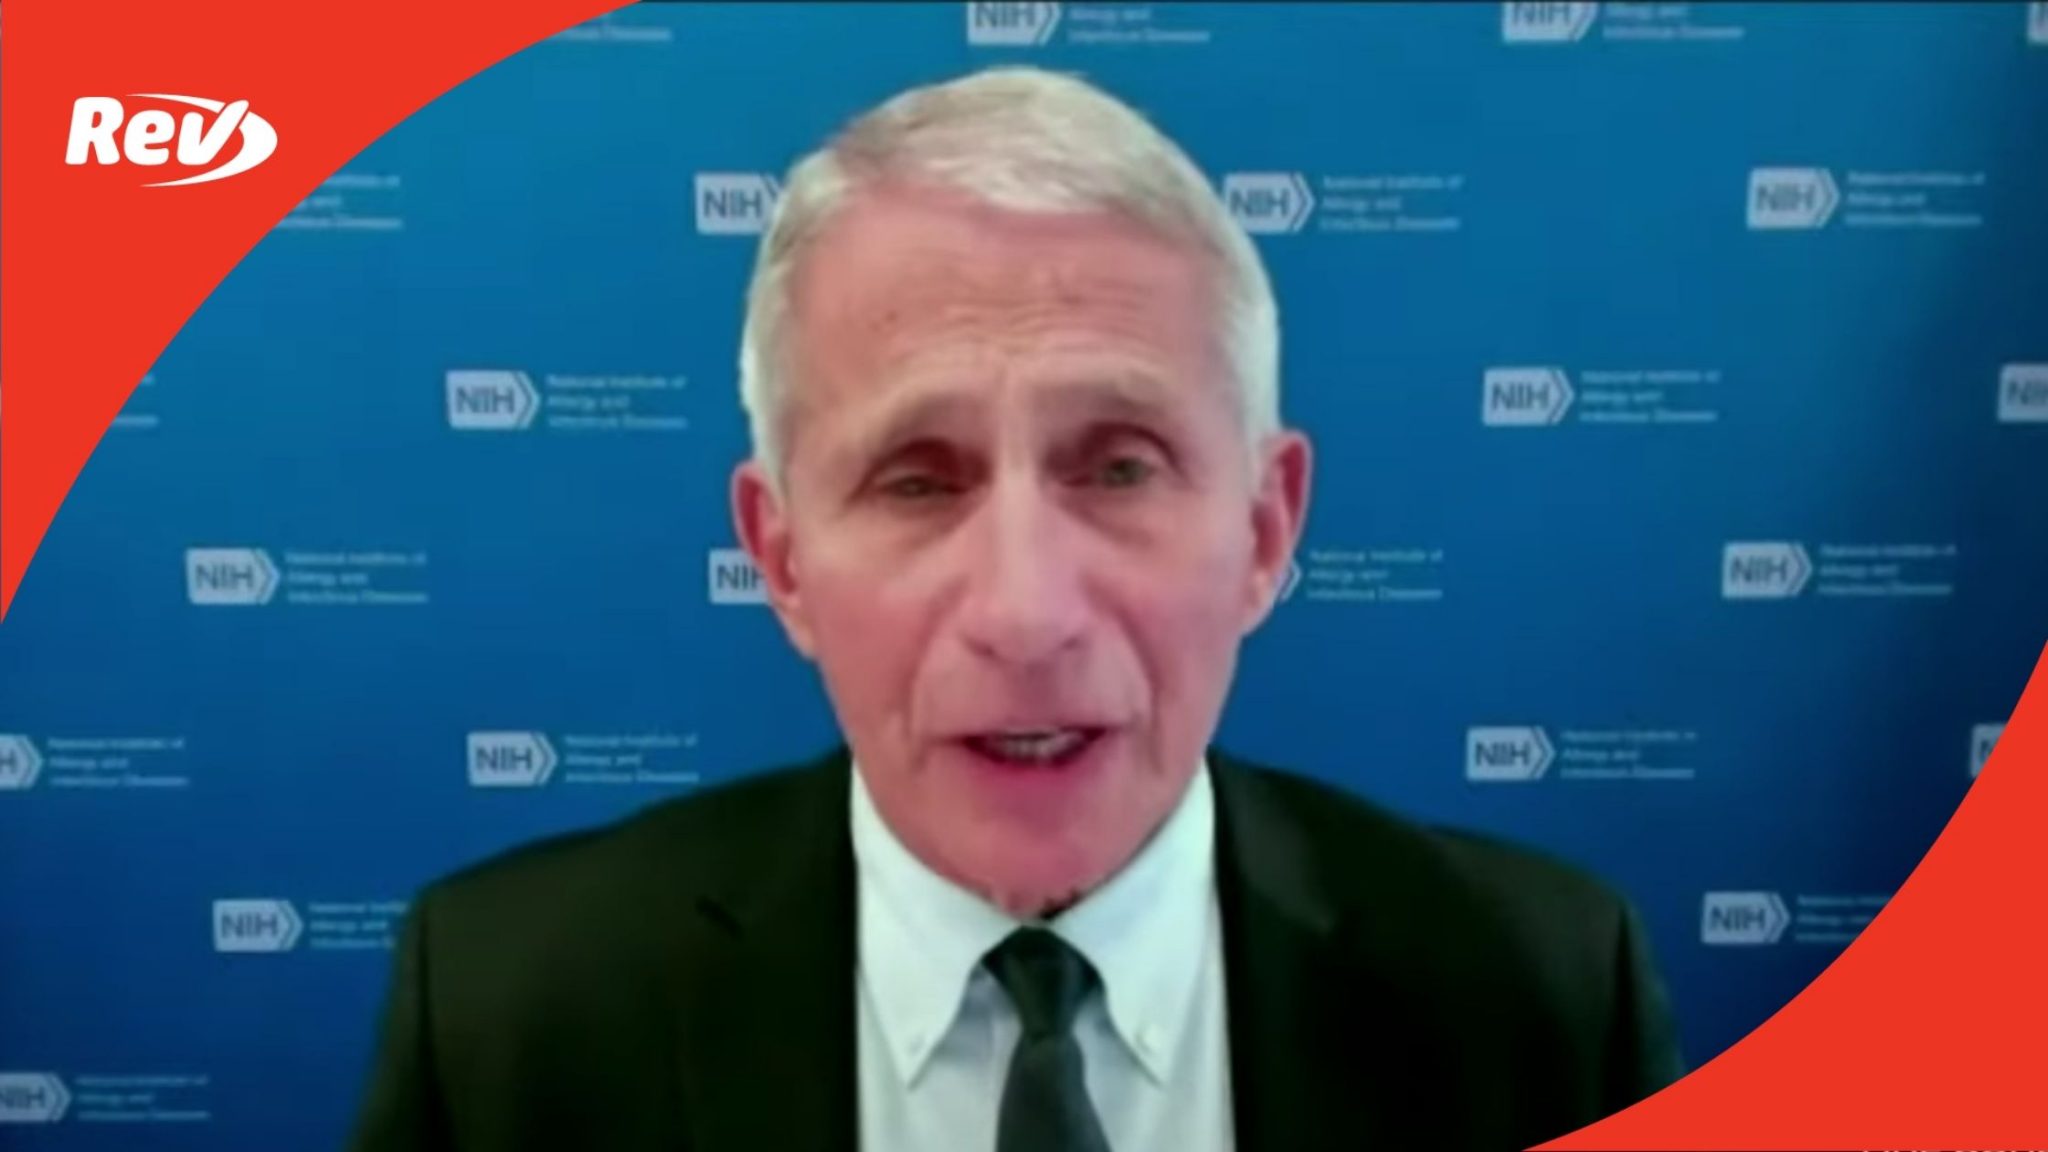 White House COVID-19 Task Force, Dr. Fauci Press Conference Transcript September 10